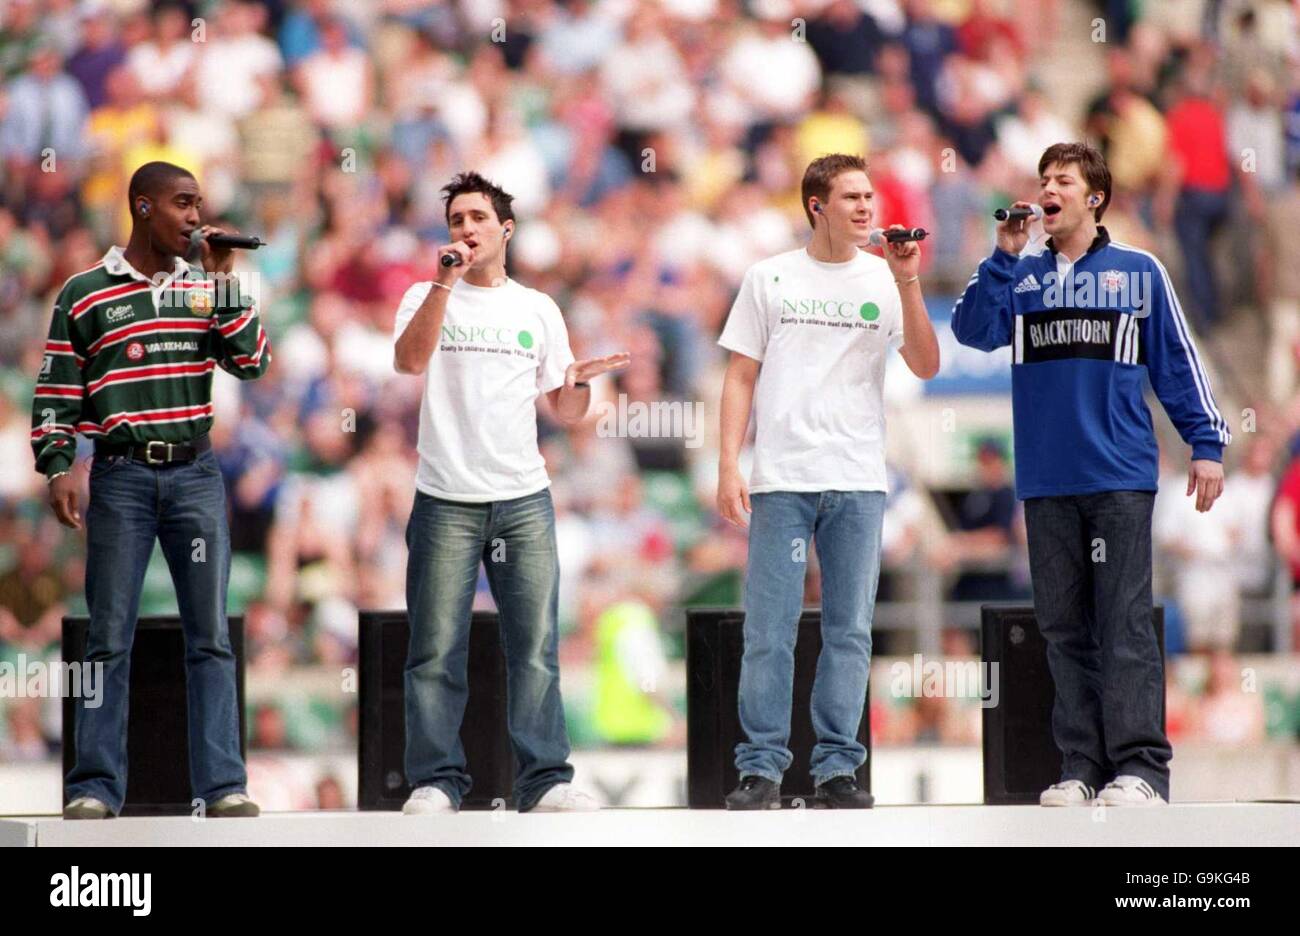 Rugby Union - Zurich Championship - Final - Leicester Tigers v Bath. R 'n' B act Blue performing at half-time Stock Photo